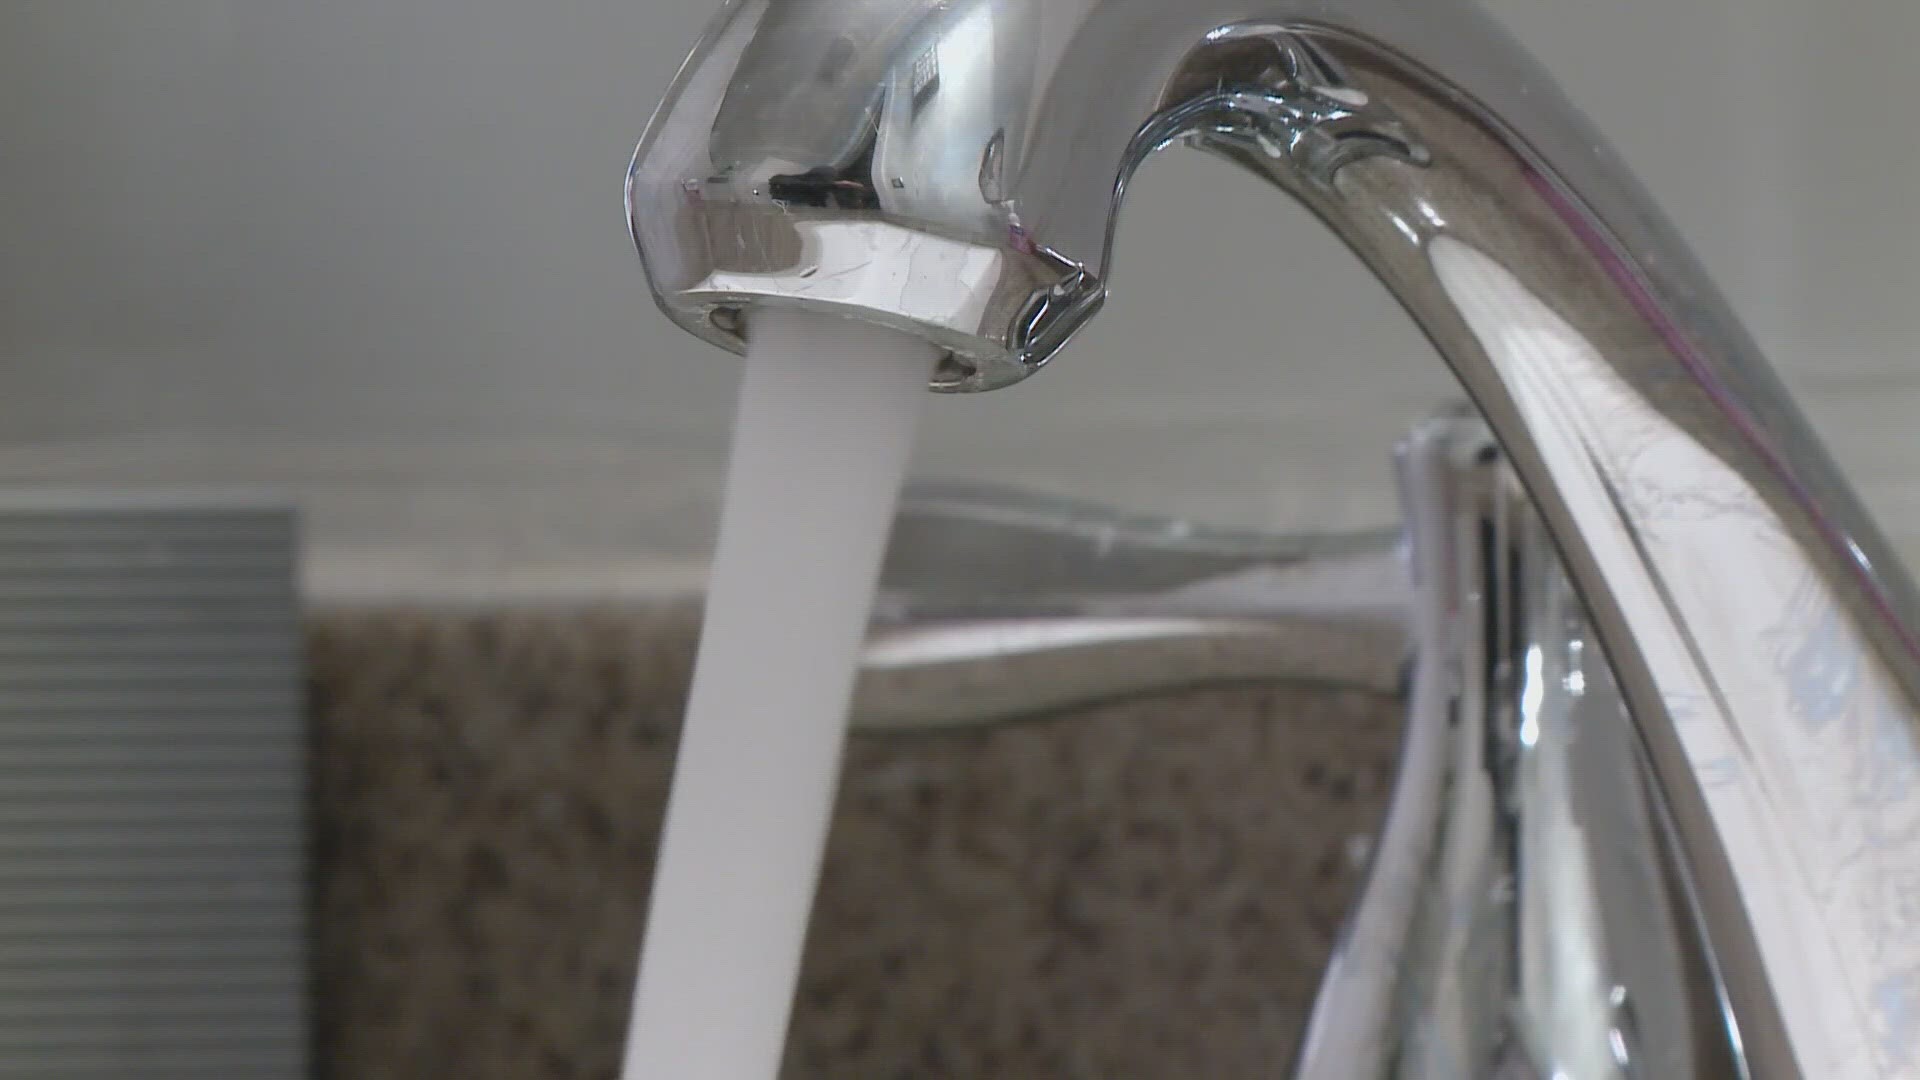 All consumers in the district are advised to boil all water for at least one minute before consumption, Caribou police said Thursday.